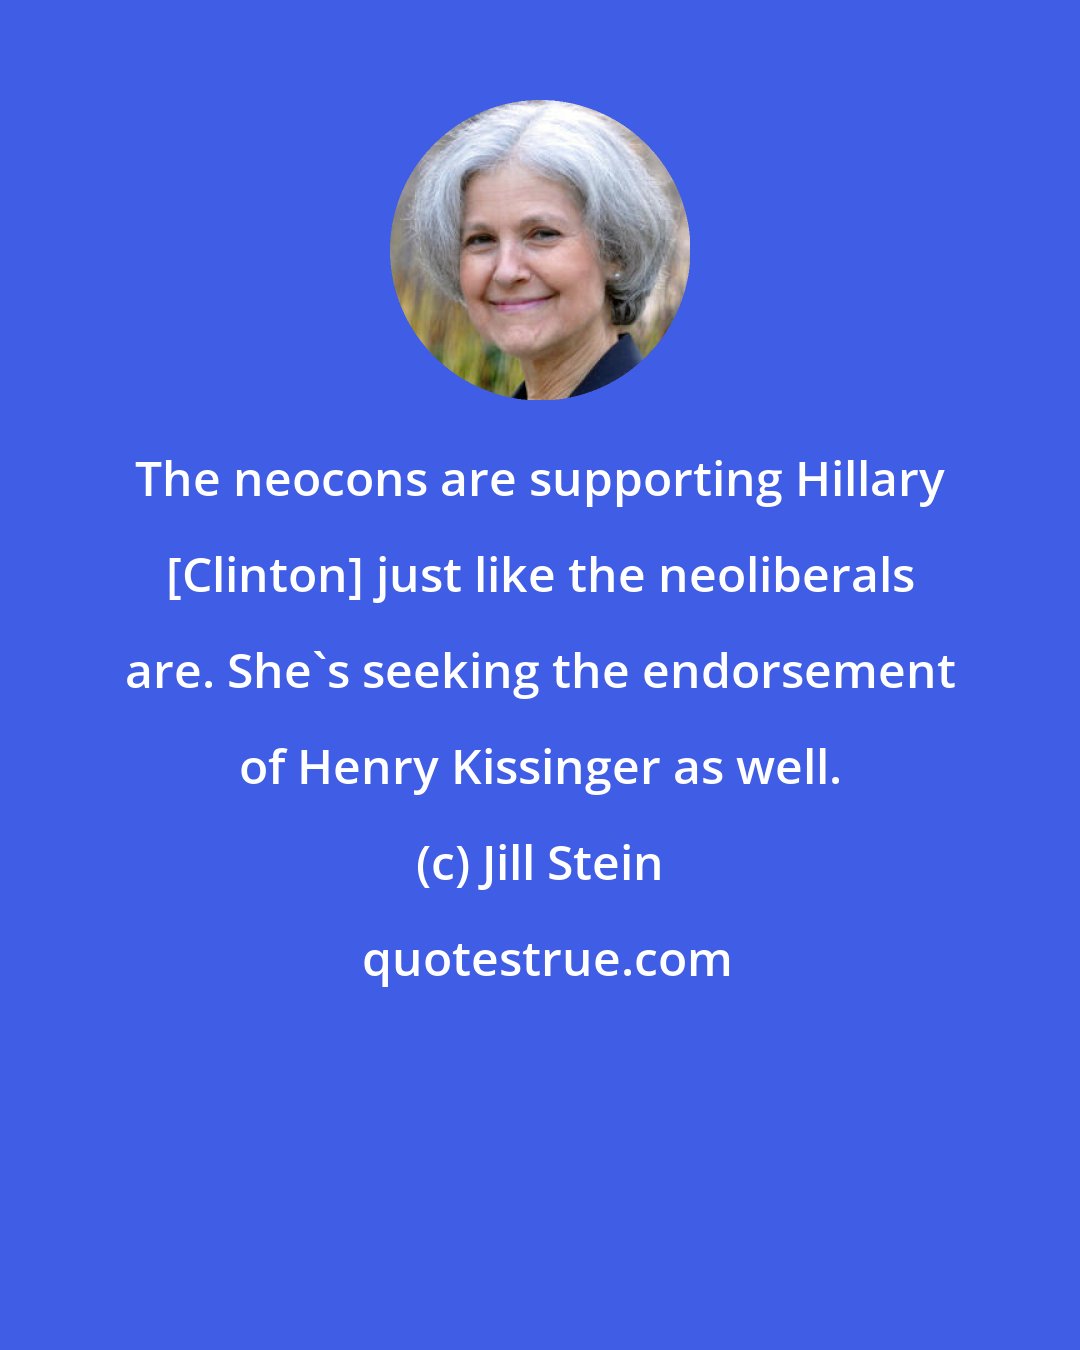 Jill Stein: The neocons are supporting Hillary [Clinton] just like the neoliberals are. She's seeking the endorsement of Henry Kissinger as well.